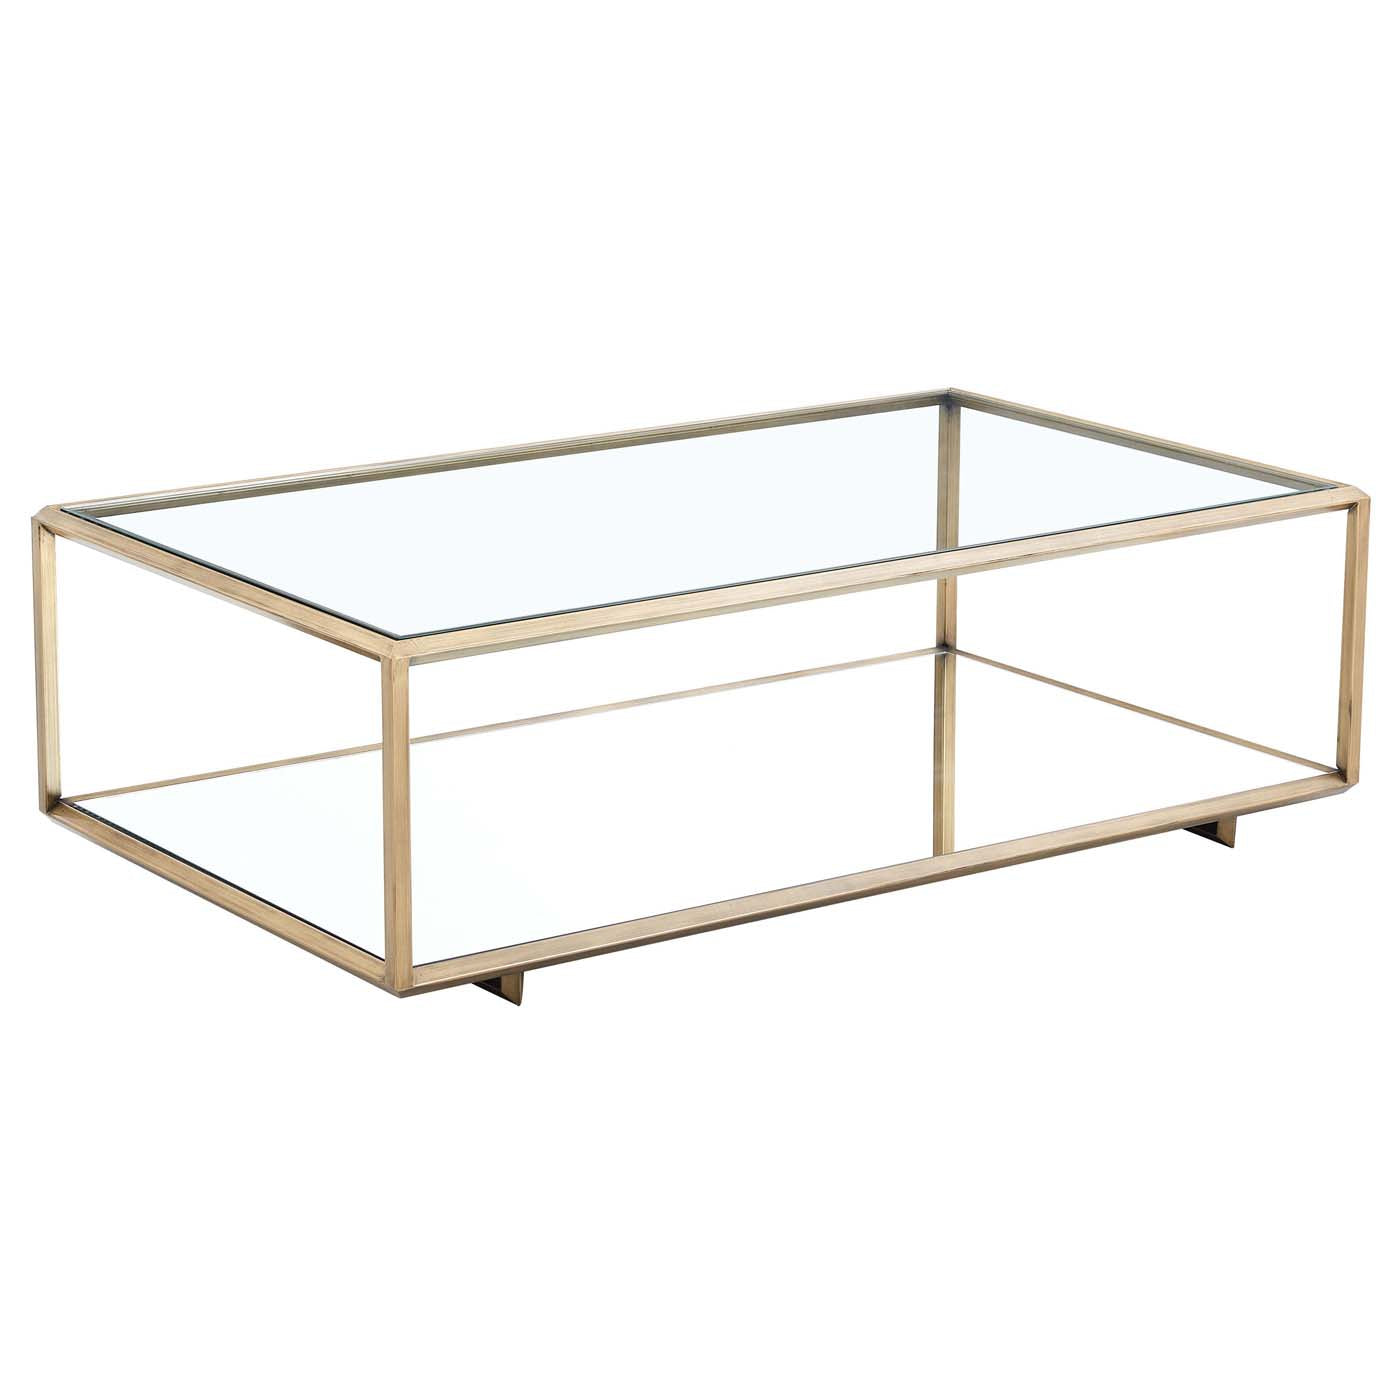 Safavieh Couture Florabella Mirrored Coffee Table